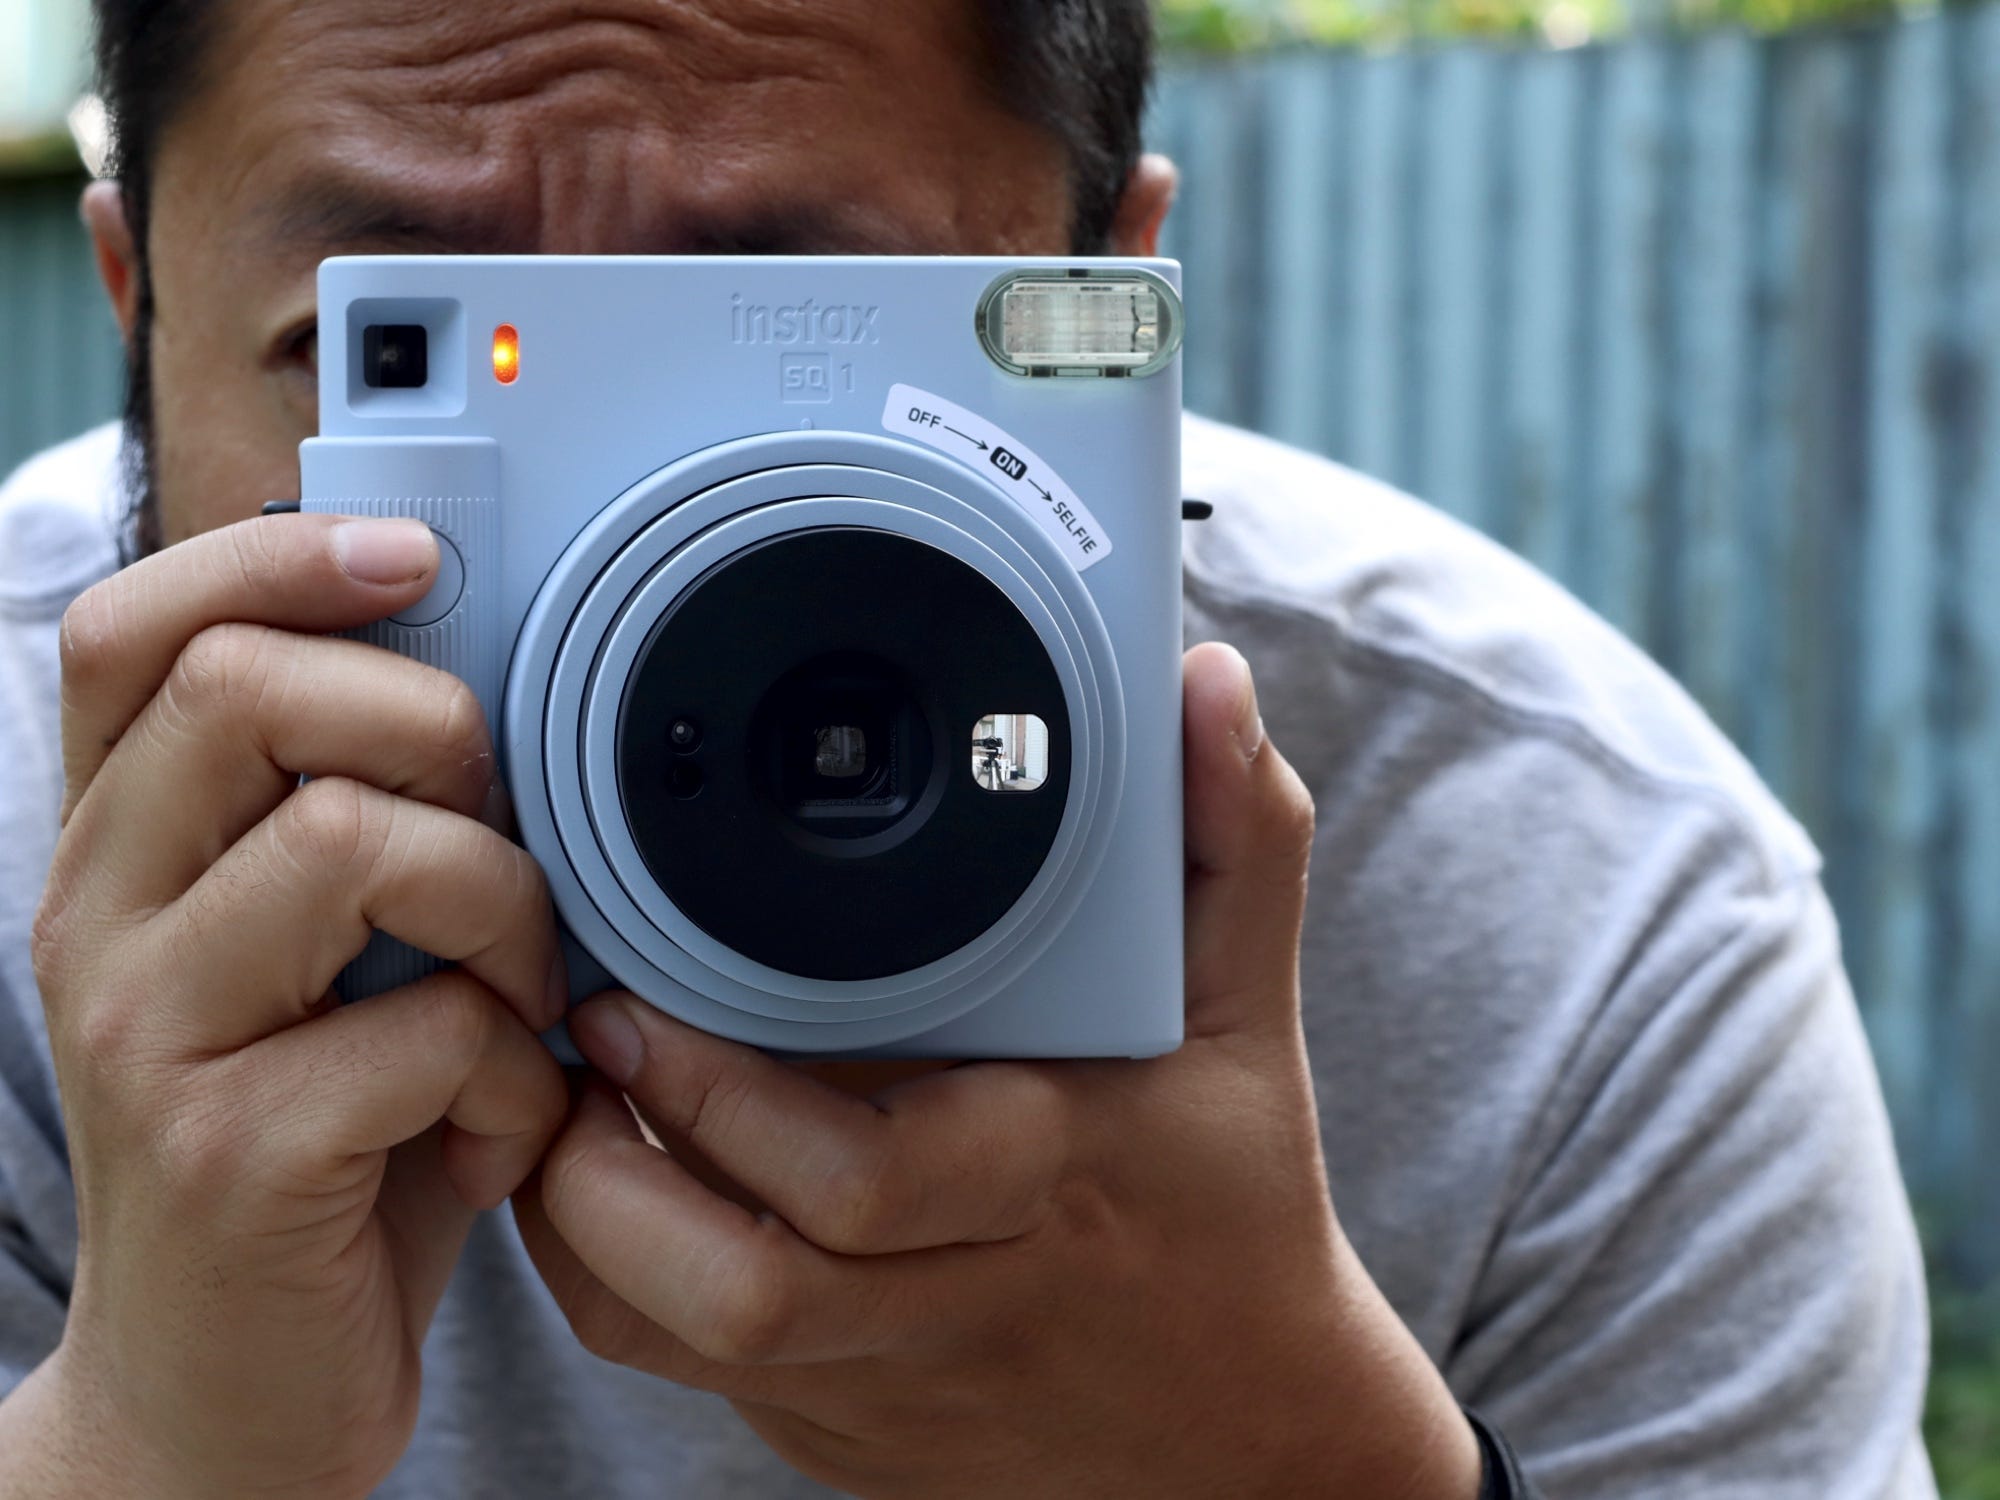 The Fujifilm Square Instax SQ1 is a fun instant camera that shoots